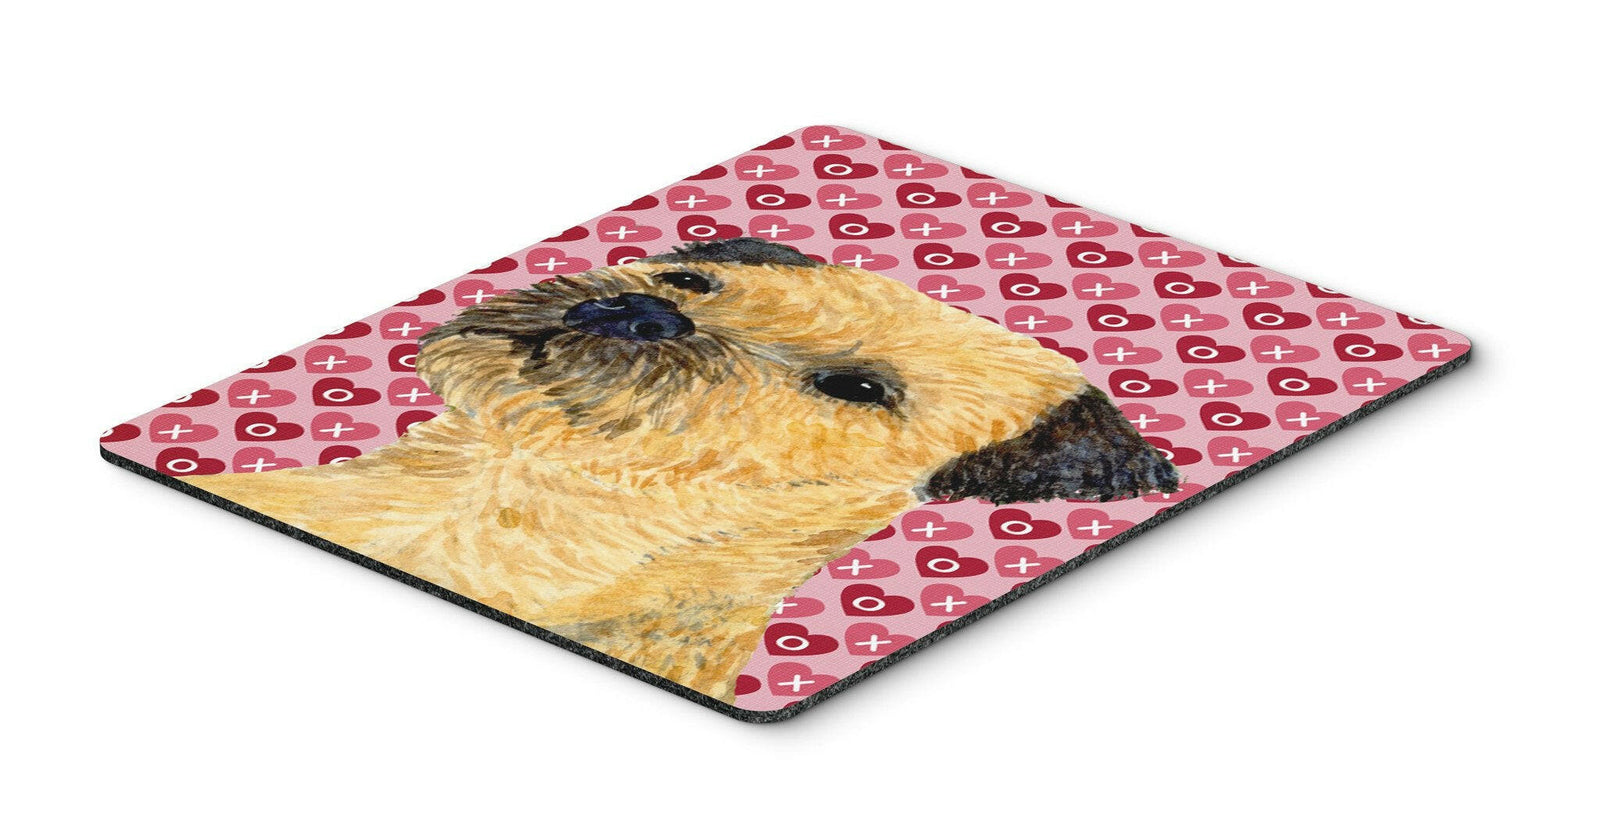 Border Terrier Hearts Love and Valentine's Day Mouse Pad, Hot Pad or Trivet by Caroline's Treasures